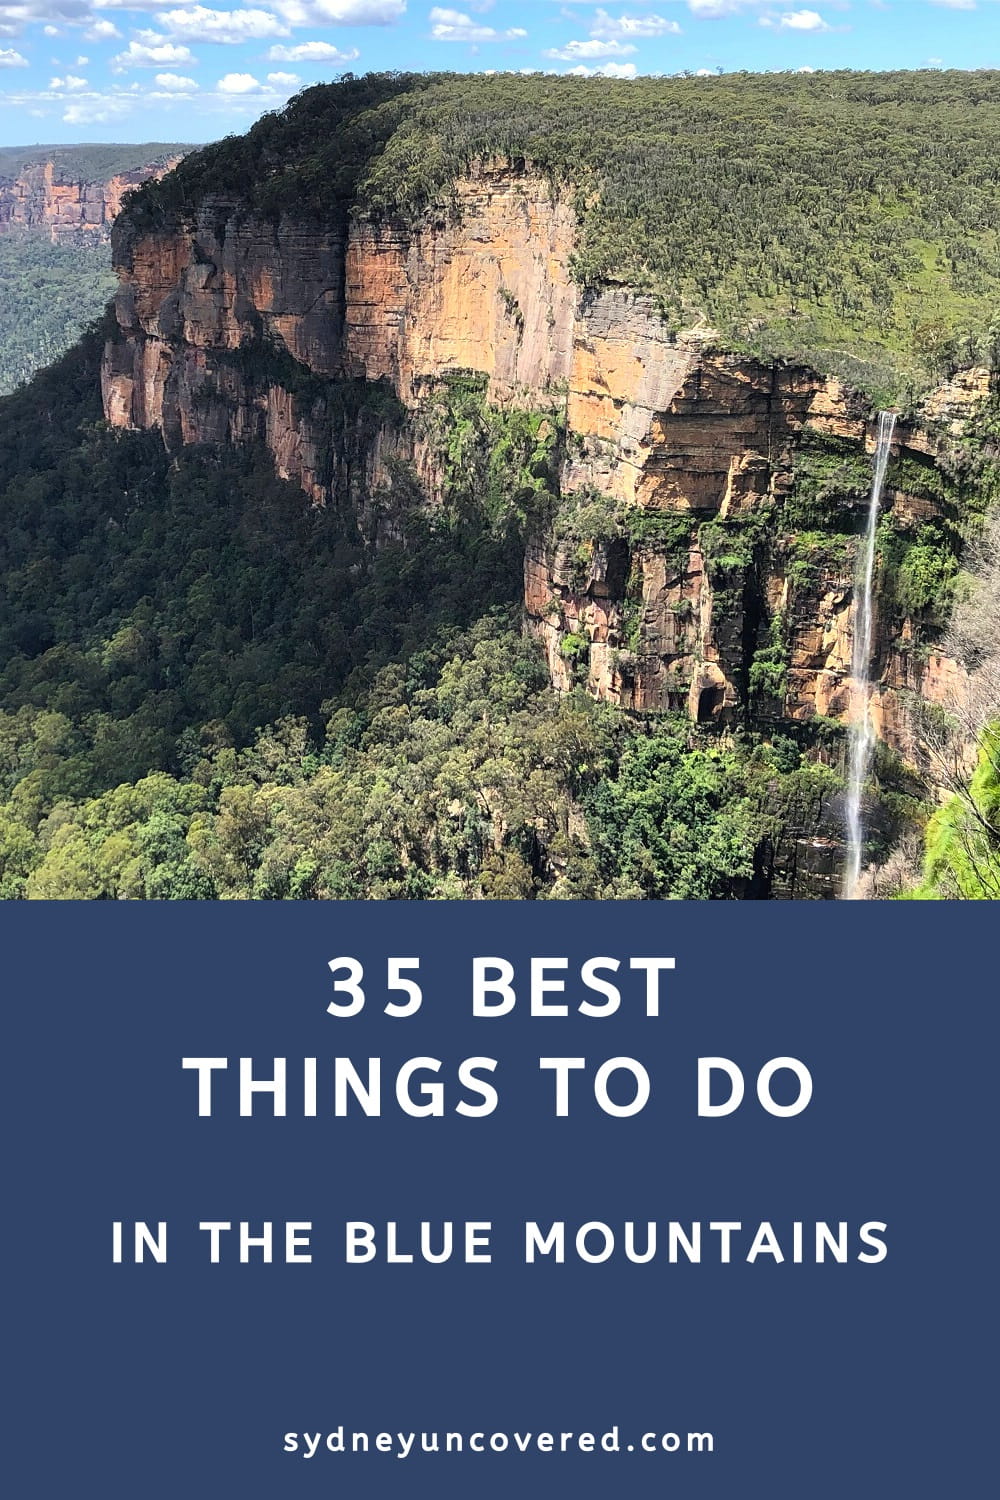 35 Best things to do in the Blue Mountains